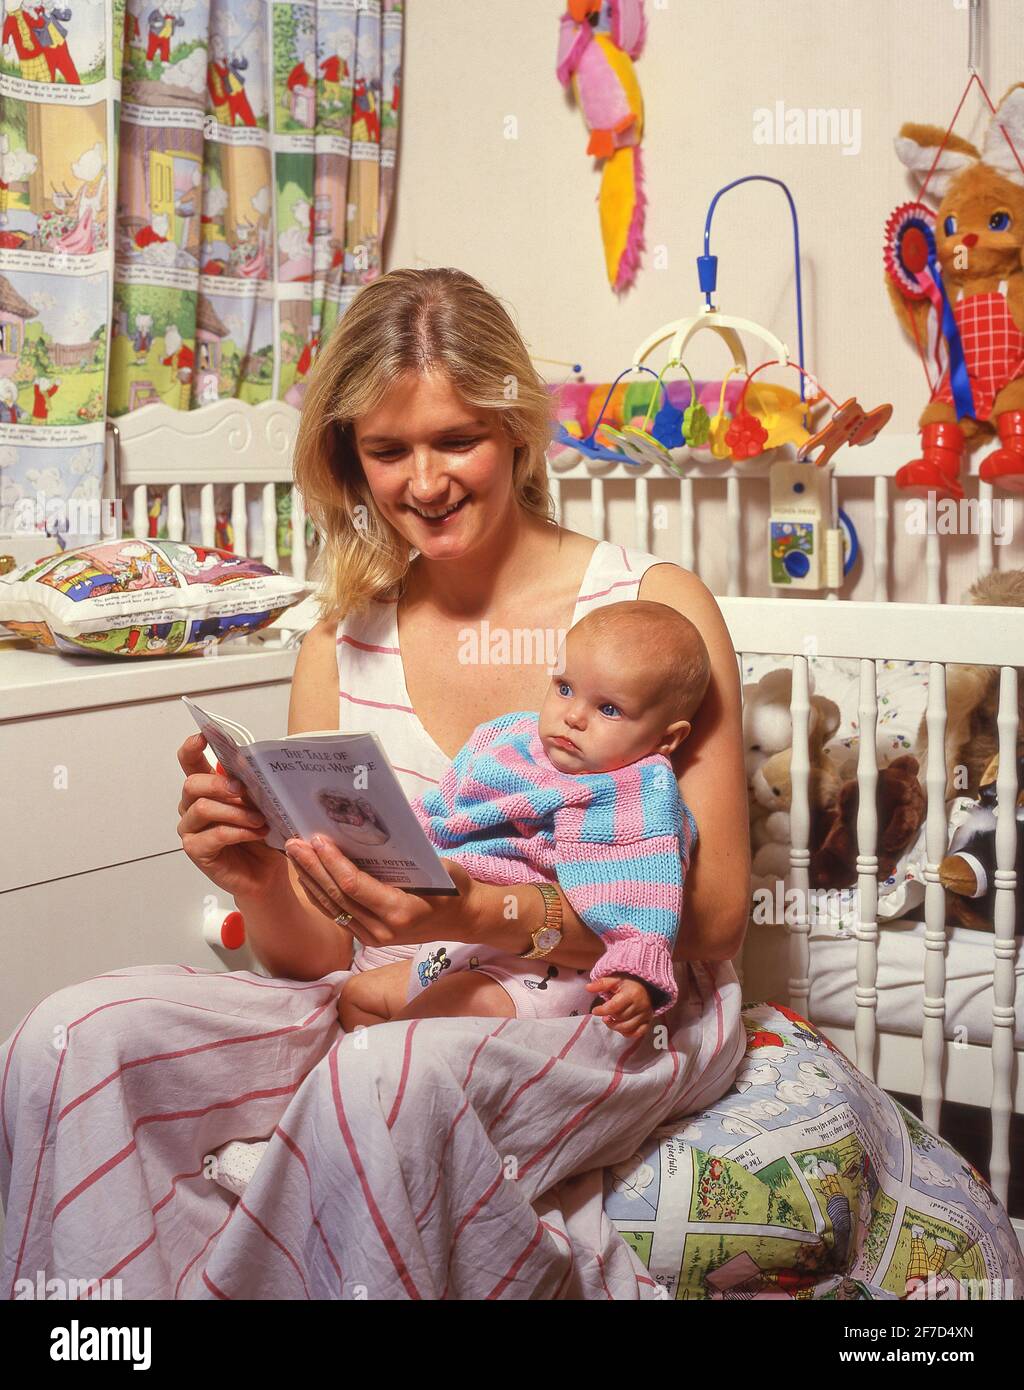 Mother reading book to baby daughter, Winkfield, Berkshire, England, United Kingdom Stock Photo